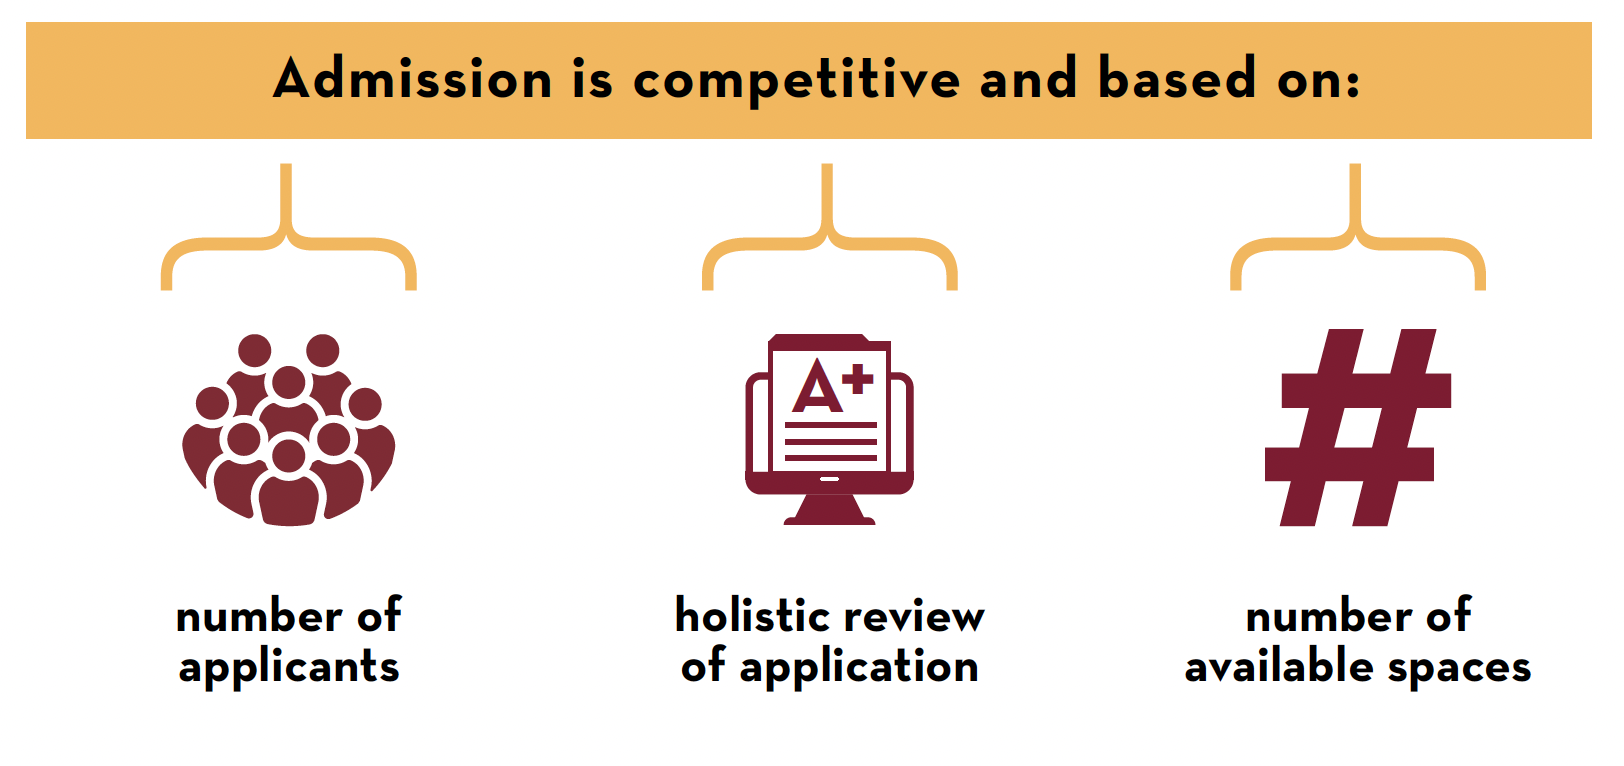 Admission is competitive and based on the number of applicants we receive, our holistic review of each application, and the number of spaces available in each college.